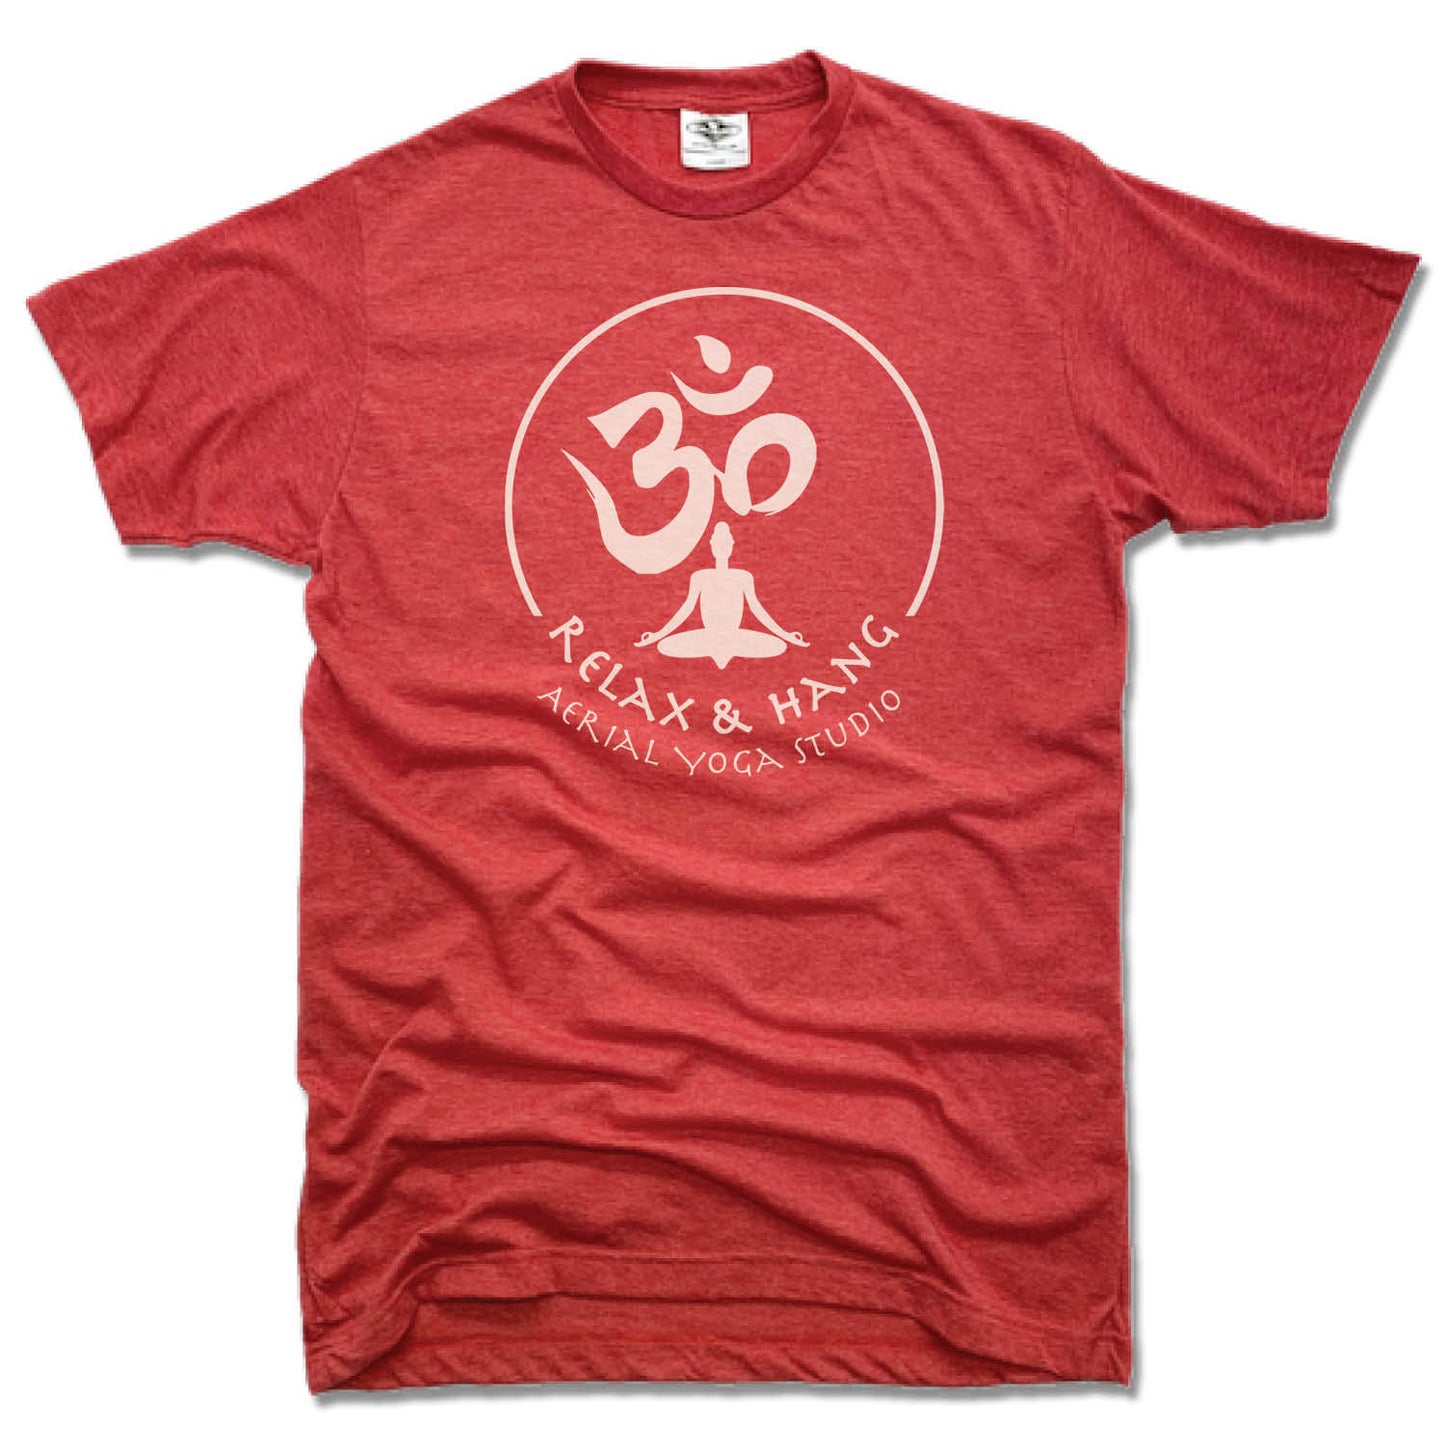 RELAX AND HANG AERIAL YOGA STUDIOS | UNISEX RED TEE | WHITE LOGO